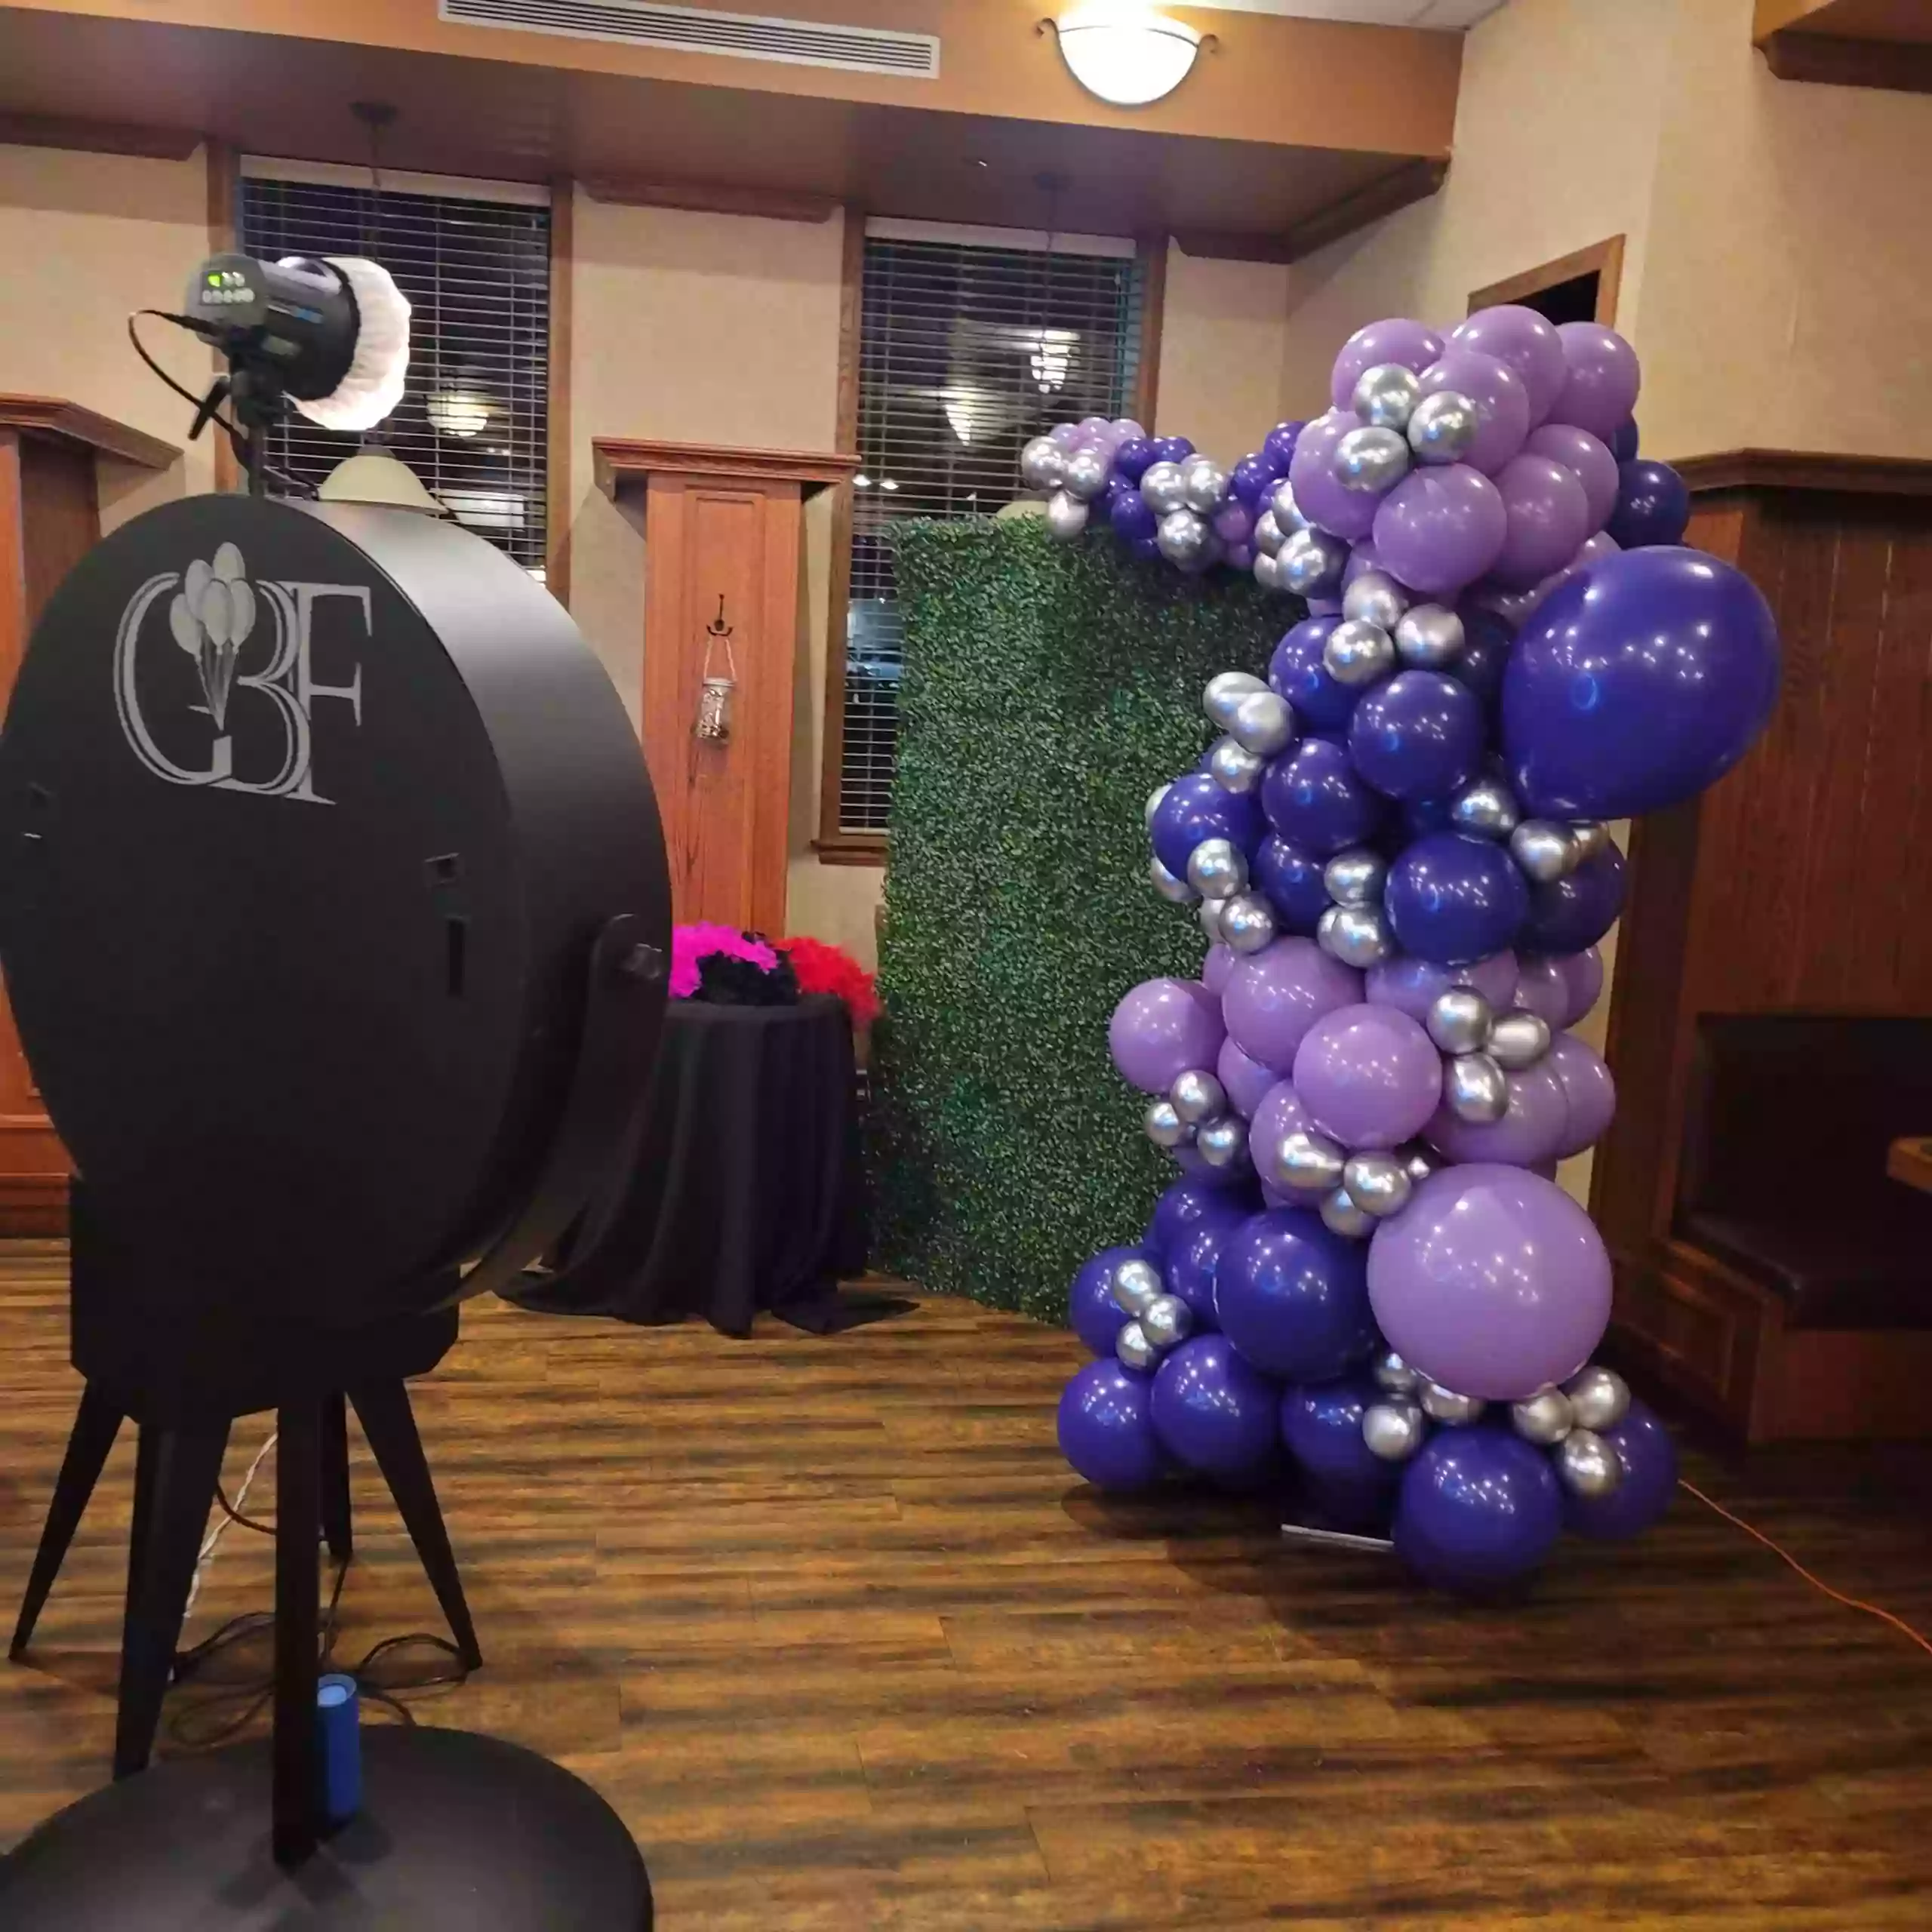 GBF Bespoke Balloons and Event Services llc